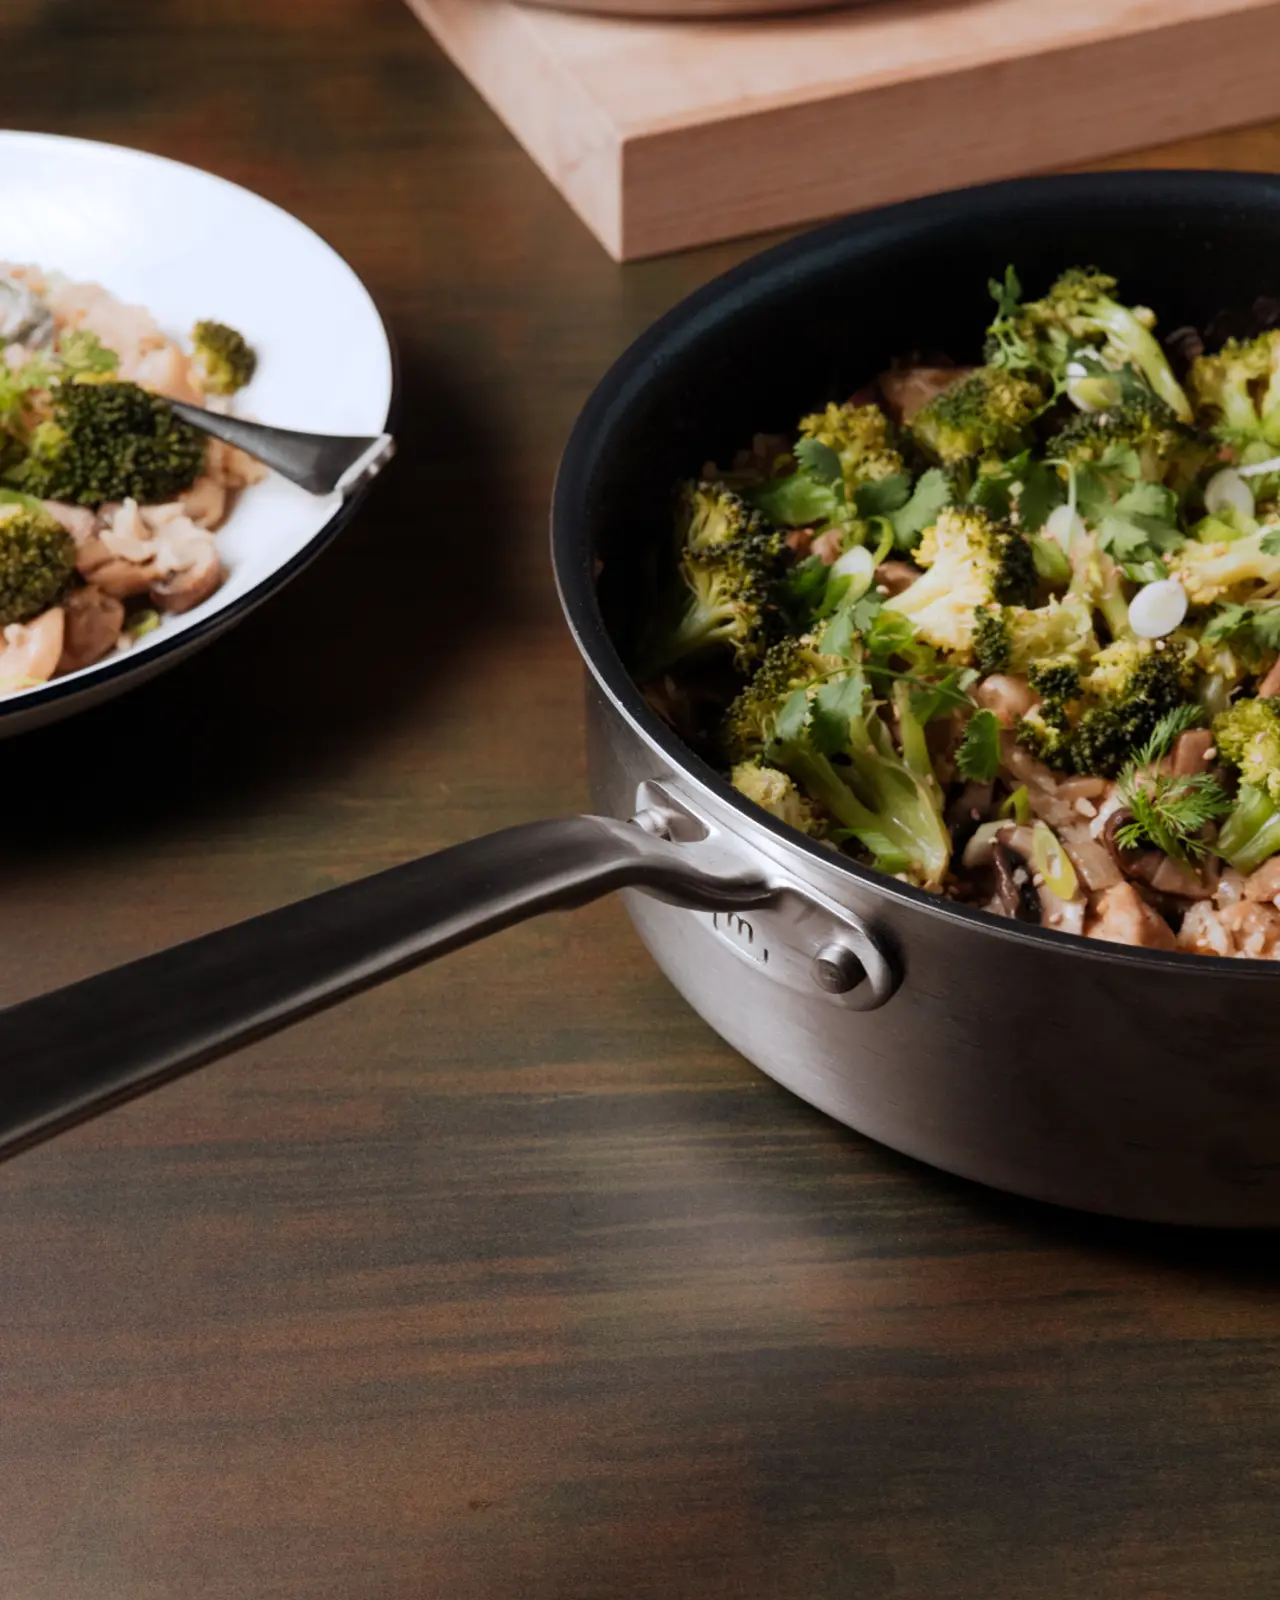 A skillet on a wooden table is filled with a stir-fried meal including broccoli and mushrooms, with a partially seen plate of the same meal in the background.